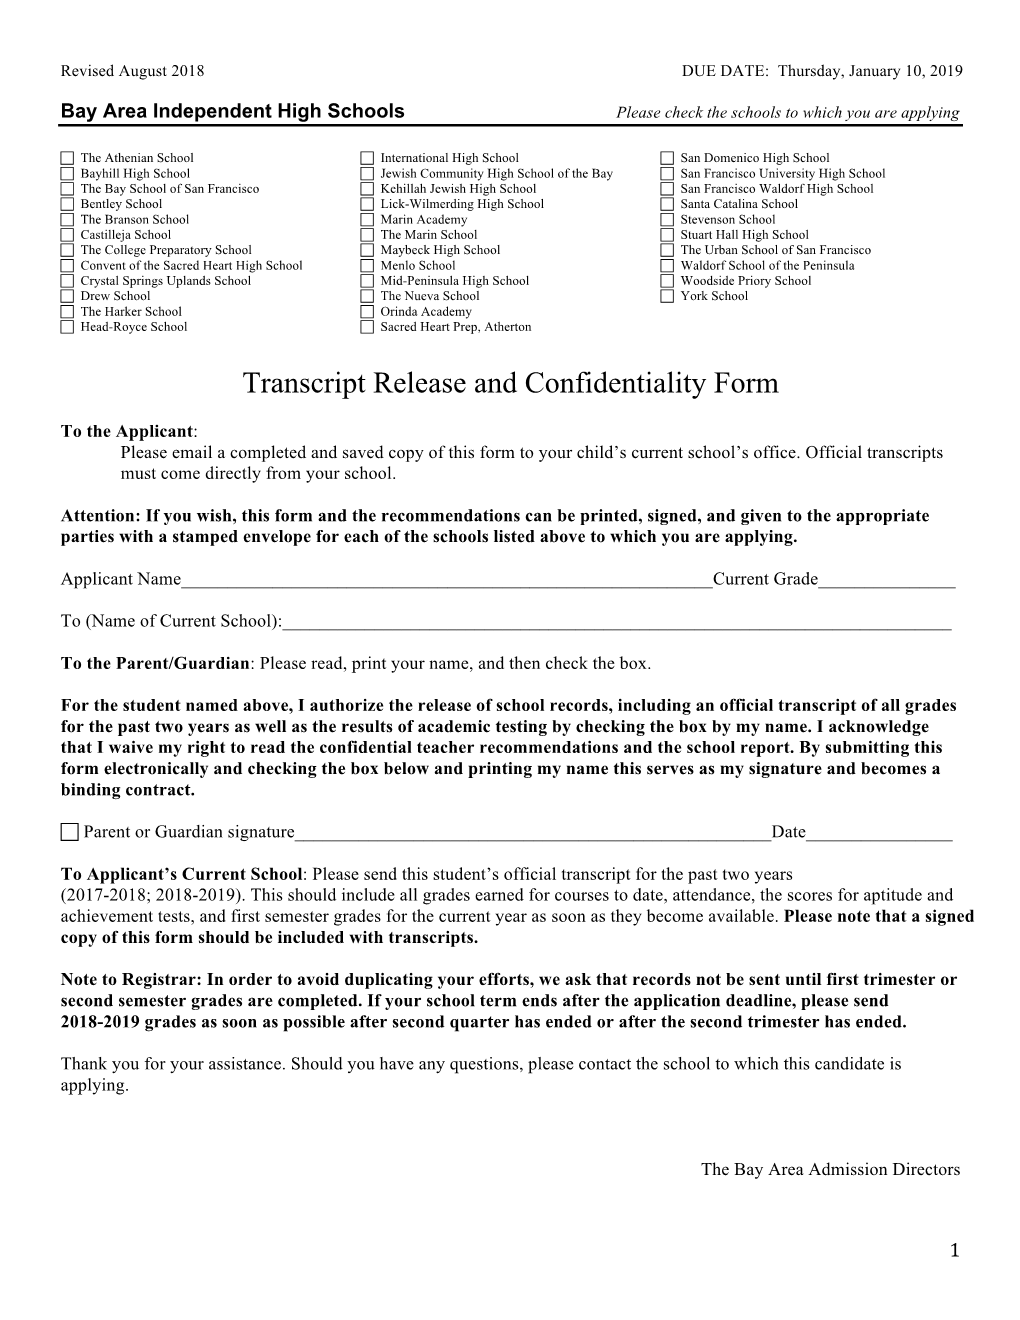 Transcript Release and Confidentiality Form